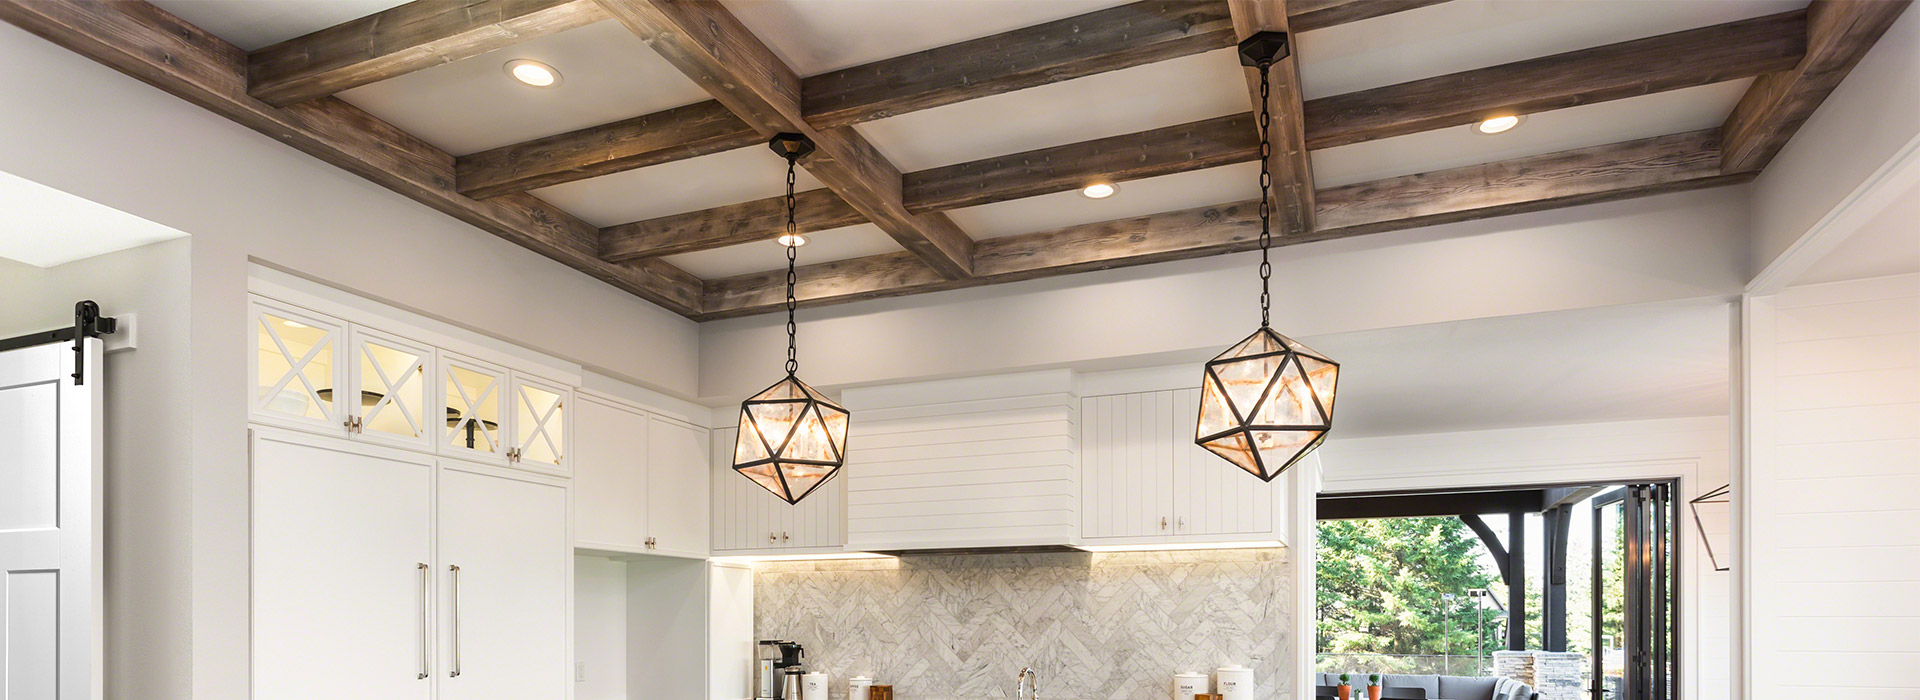 Fypon Polyurethane beams and 2 geometric lights in a kitchen ceiling